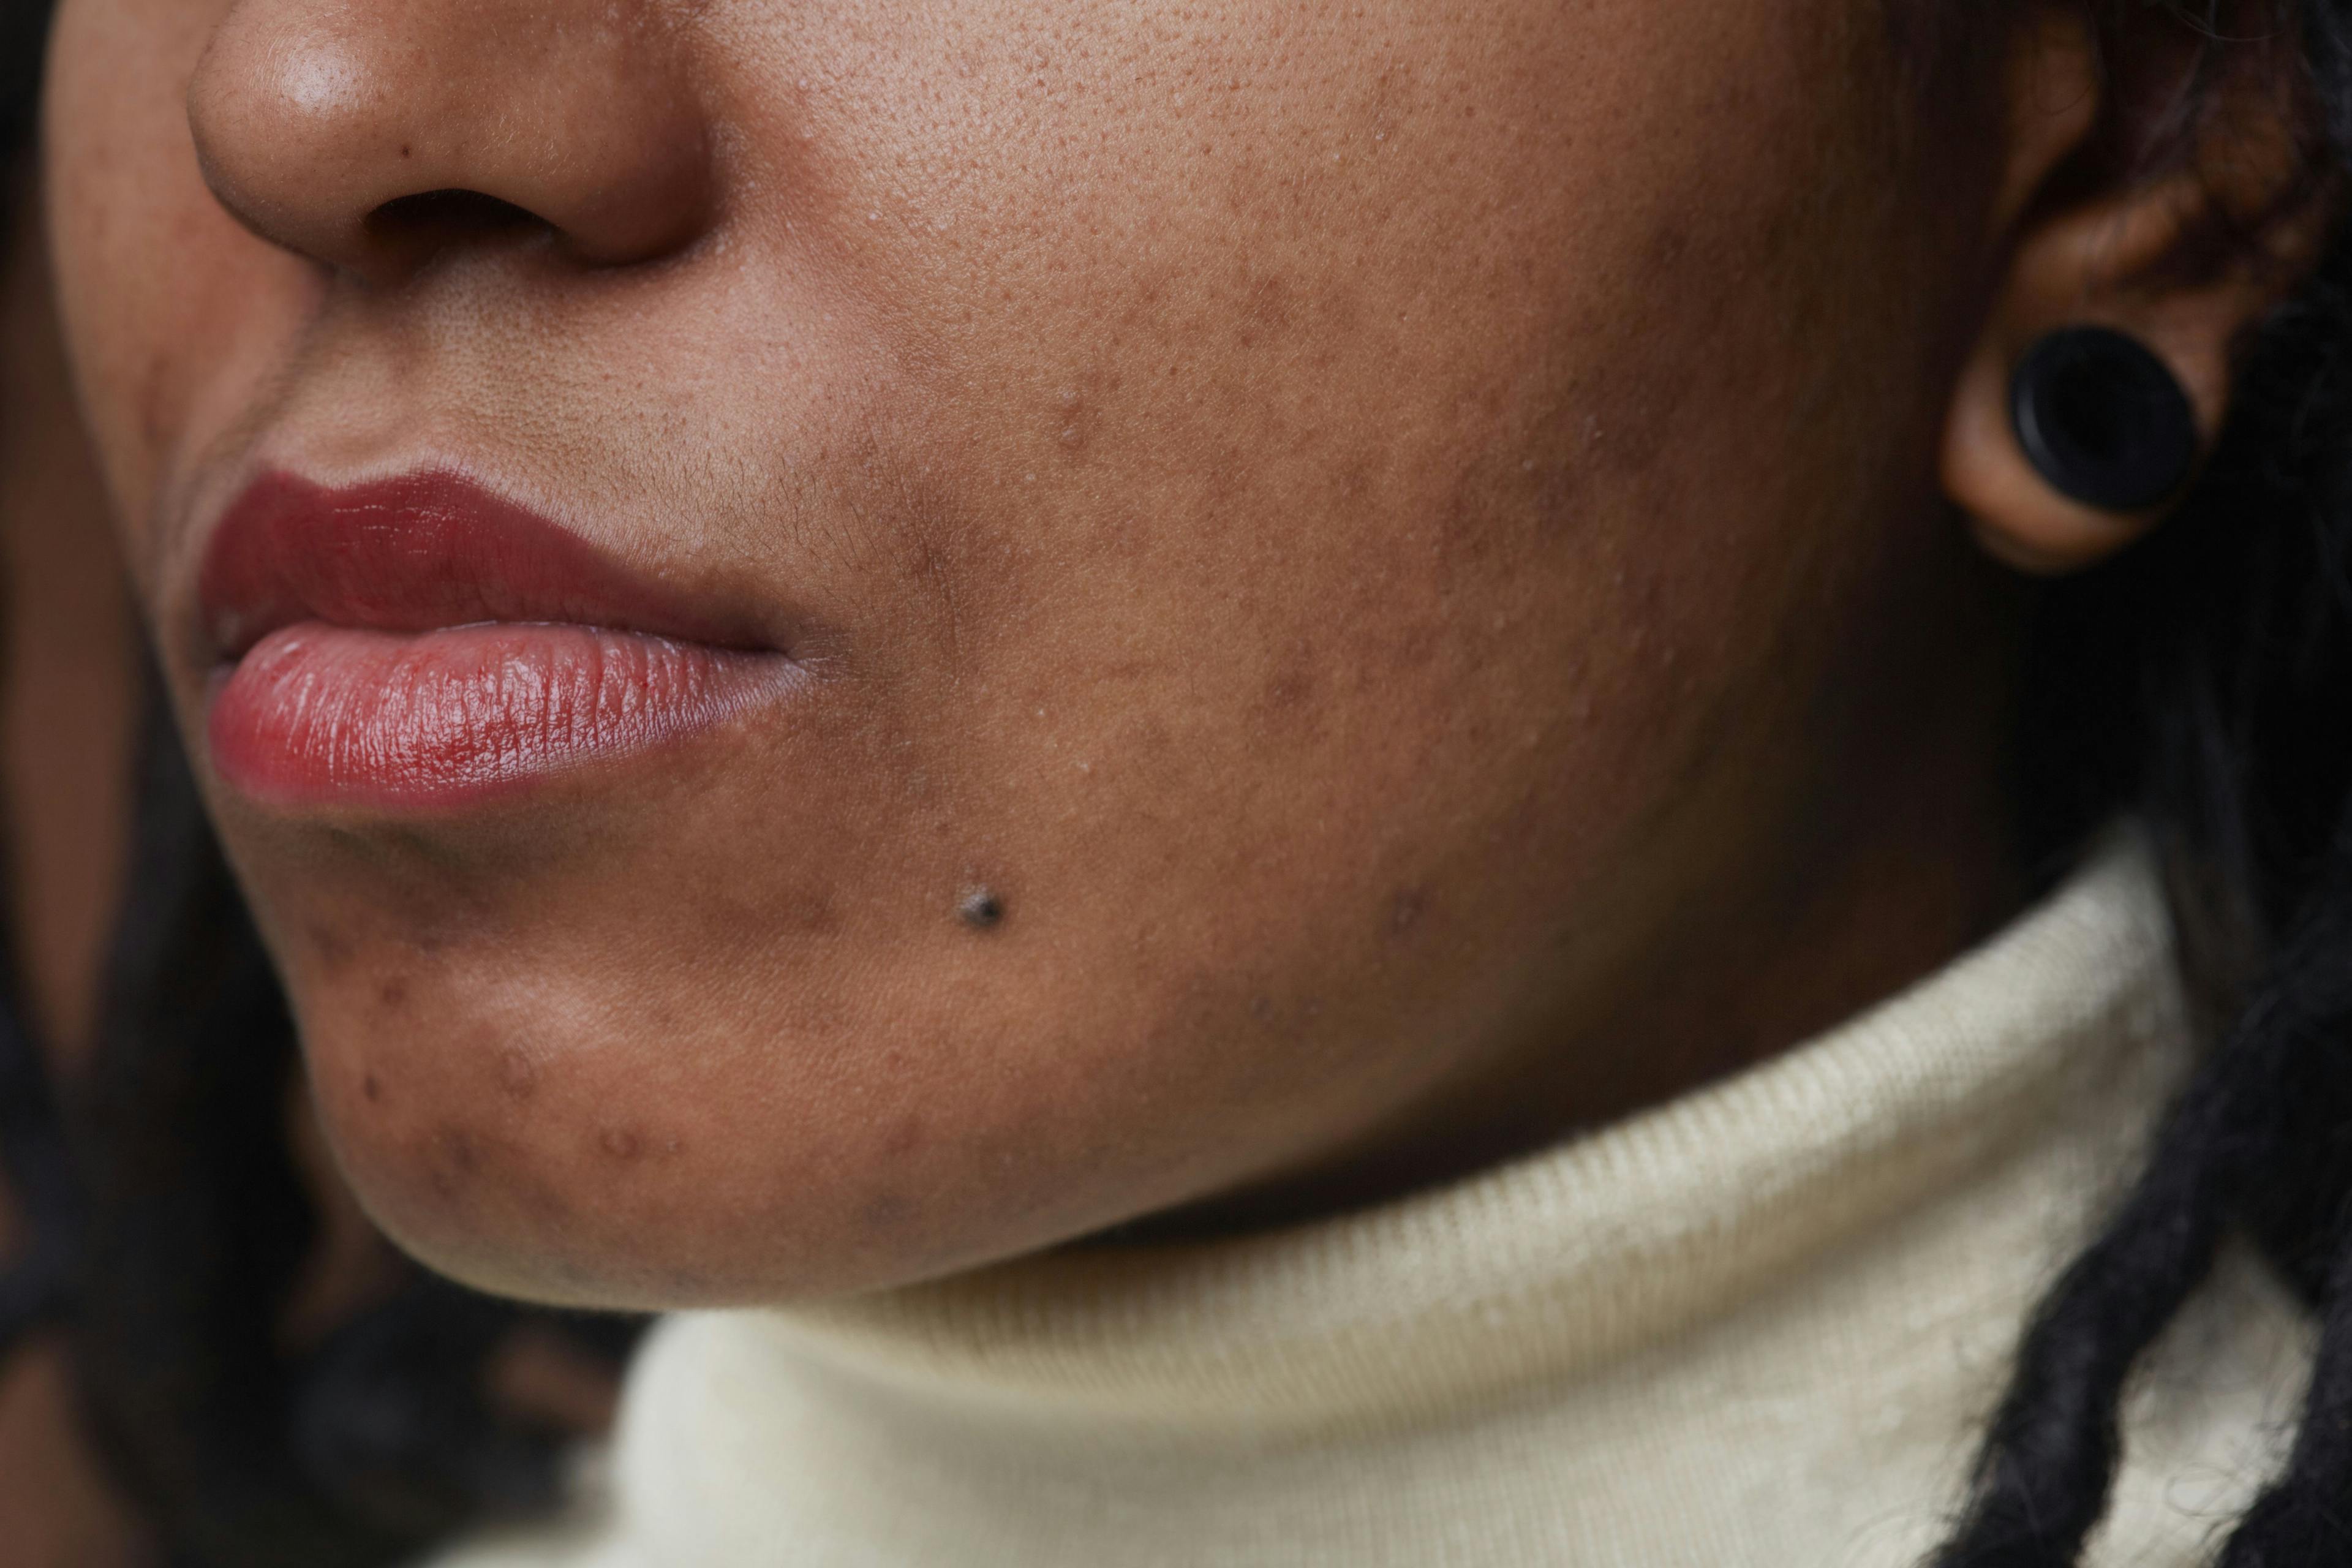 IDP-126 Gel Led to Improvements in Erythema Among Black Patients With Acne